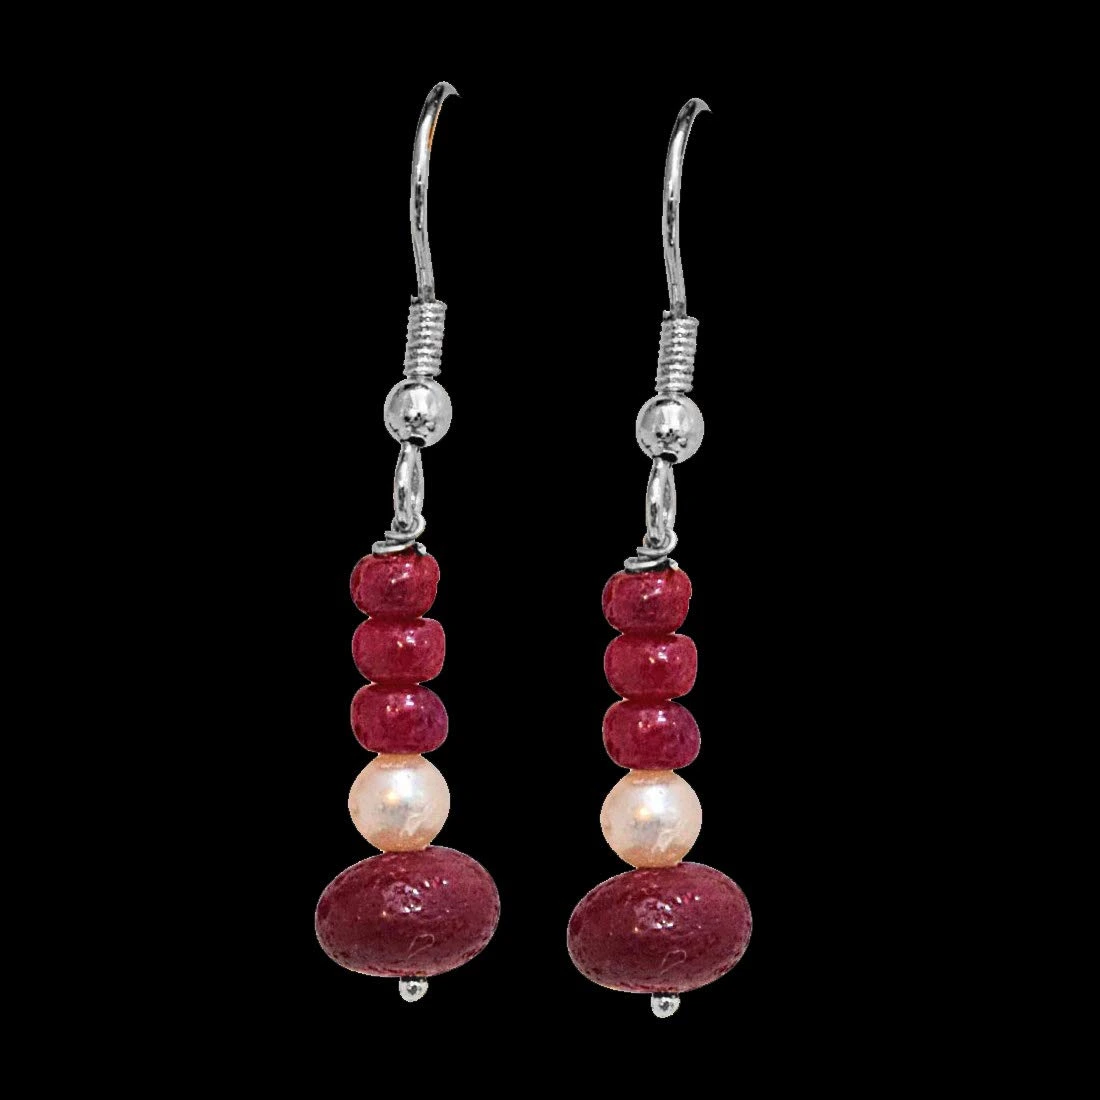 Real Bright Red Ruby Beads & Freshwater Pearl Silver Plated Hanging Earrings for Women (SE351)